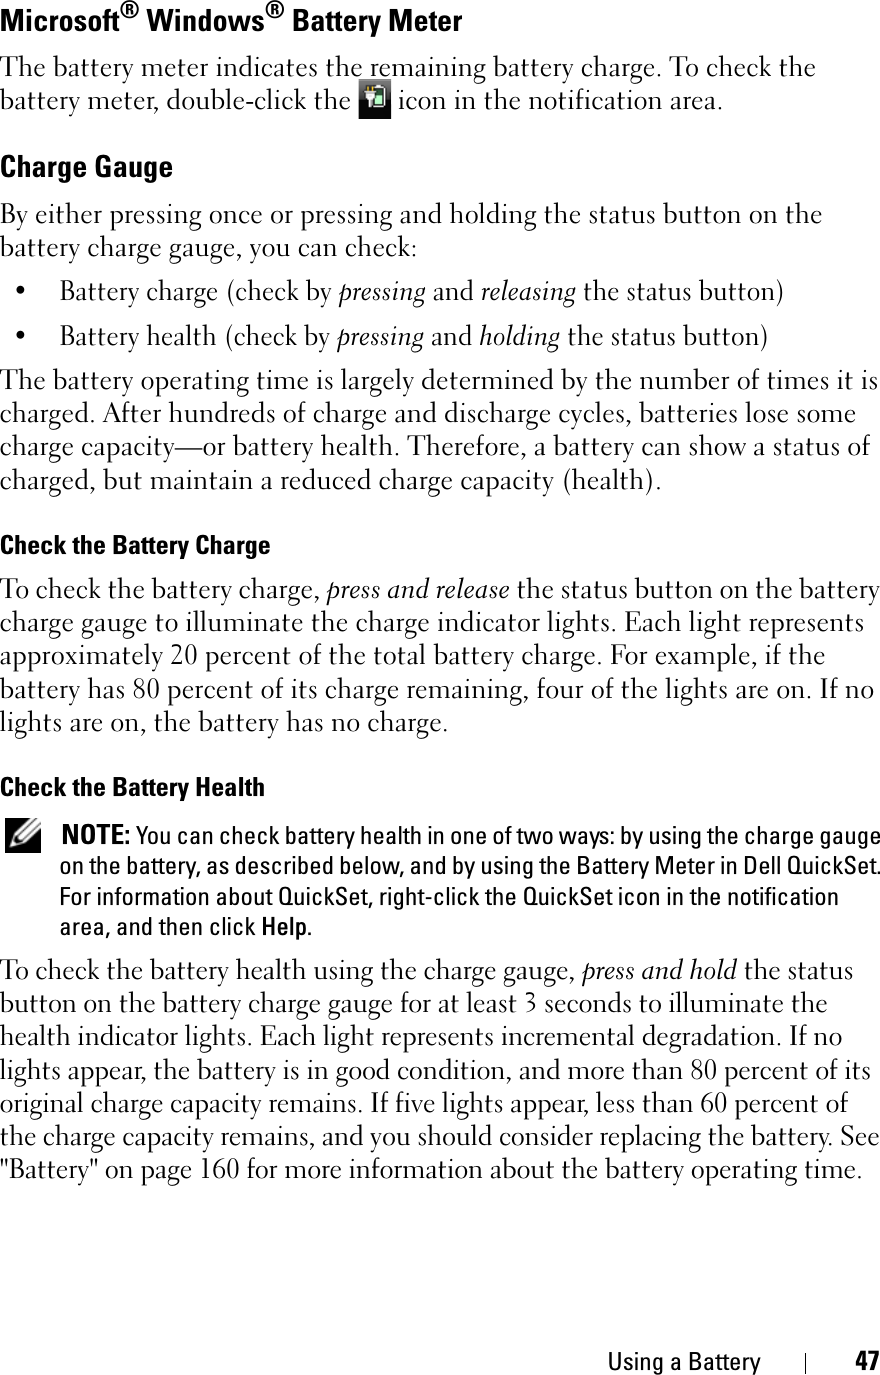 Using a Battery 47Microsoft® Windows® Battery MeterThe battery meter indicates the remaining battery charge. To check the battery meter, double-click the   icon in the notification area. Charge GaugeBy either pressing once or pressing and holding the status button on the battery charge gauge, you can check:• Battery charge (check by pressing and releasing the status button)• Battery health (check by pressing and holding the status button)The battery operating time is largely determined by the number of times it is charged. After hundreds of charge and discharge cycles, batteries lose some charge capacity—or battery health. Therefore, a battery can show a status of charged, but maintain a reduced charge capacity (health).Check the Battery ChargeTo check the battery charge, press and release the status button on the battery charge gauge to illuminate the charge indicator lights. Each light represents approximately 20 percent of the total battery charge. For example, if the battery has 80 percent of its charge remaining, four of the lights are on. If no lights are on, the battery has no charge.Check the Battery HealthNOTE: You can check battery health in one of two ways: by using the charge gauge on the battery, as described below, and by using the Battery Meter in Dell QuickSet. For information about QuickSet, right-click the QuickSet icon in the notification area, and then click Help.To check the battery health using the charge gauge, press and hold the status button on the battery charge gauge for at least 3 seconds to illuminate the health indicator lights. Each light represents incremental degradation. If no lights appear, the battery is in good condition, and more than 80 percent of its original charge capacity remains. If five lights appear, less than 60 percent of the charge capacity remains, and you should consider replacing the battery. See &quot;Battery&quot; on page 160 for more information about the battery operating time.